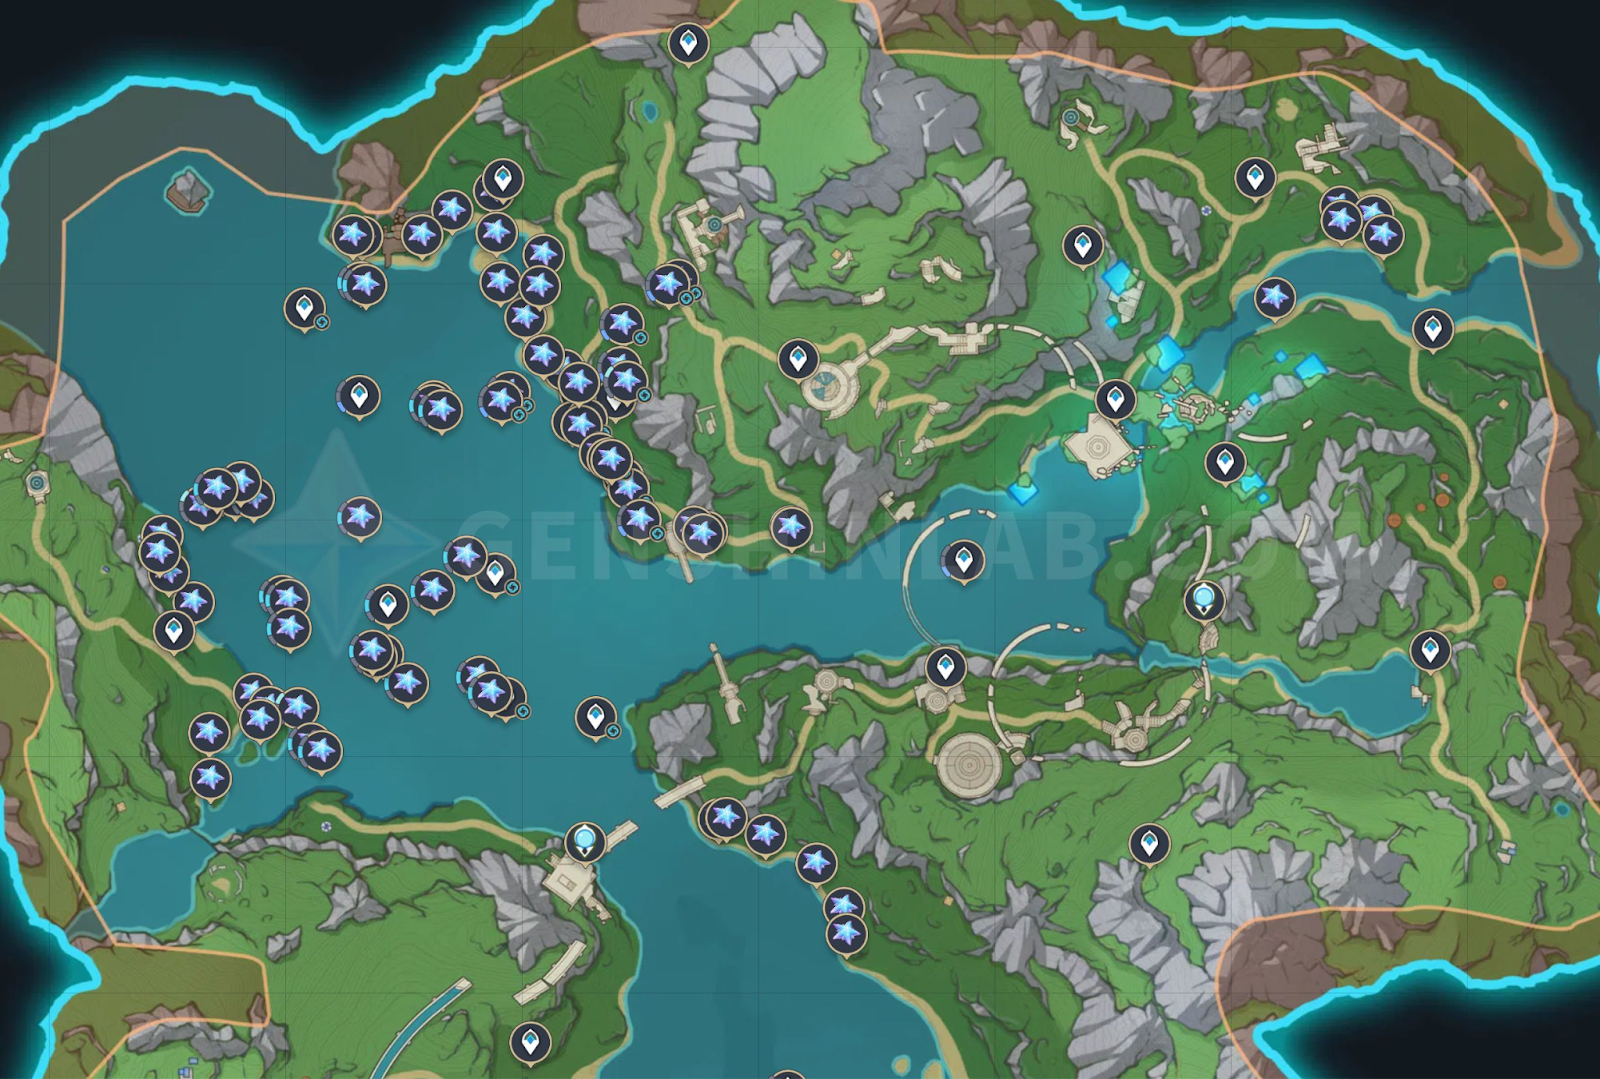 Locations in the map